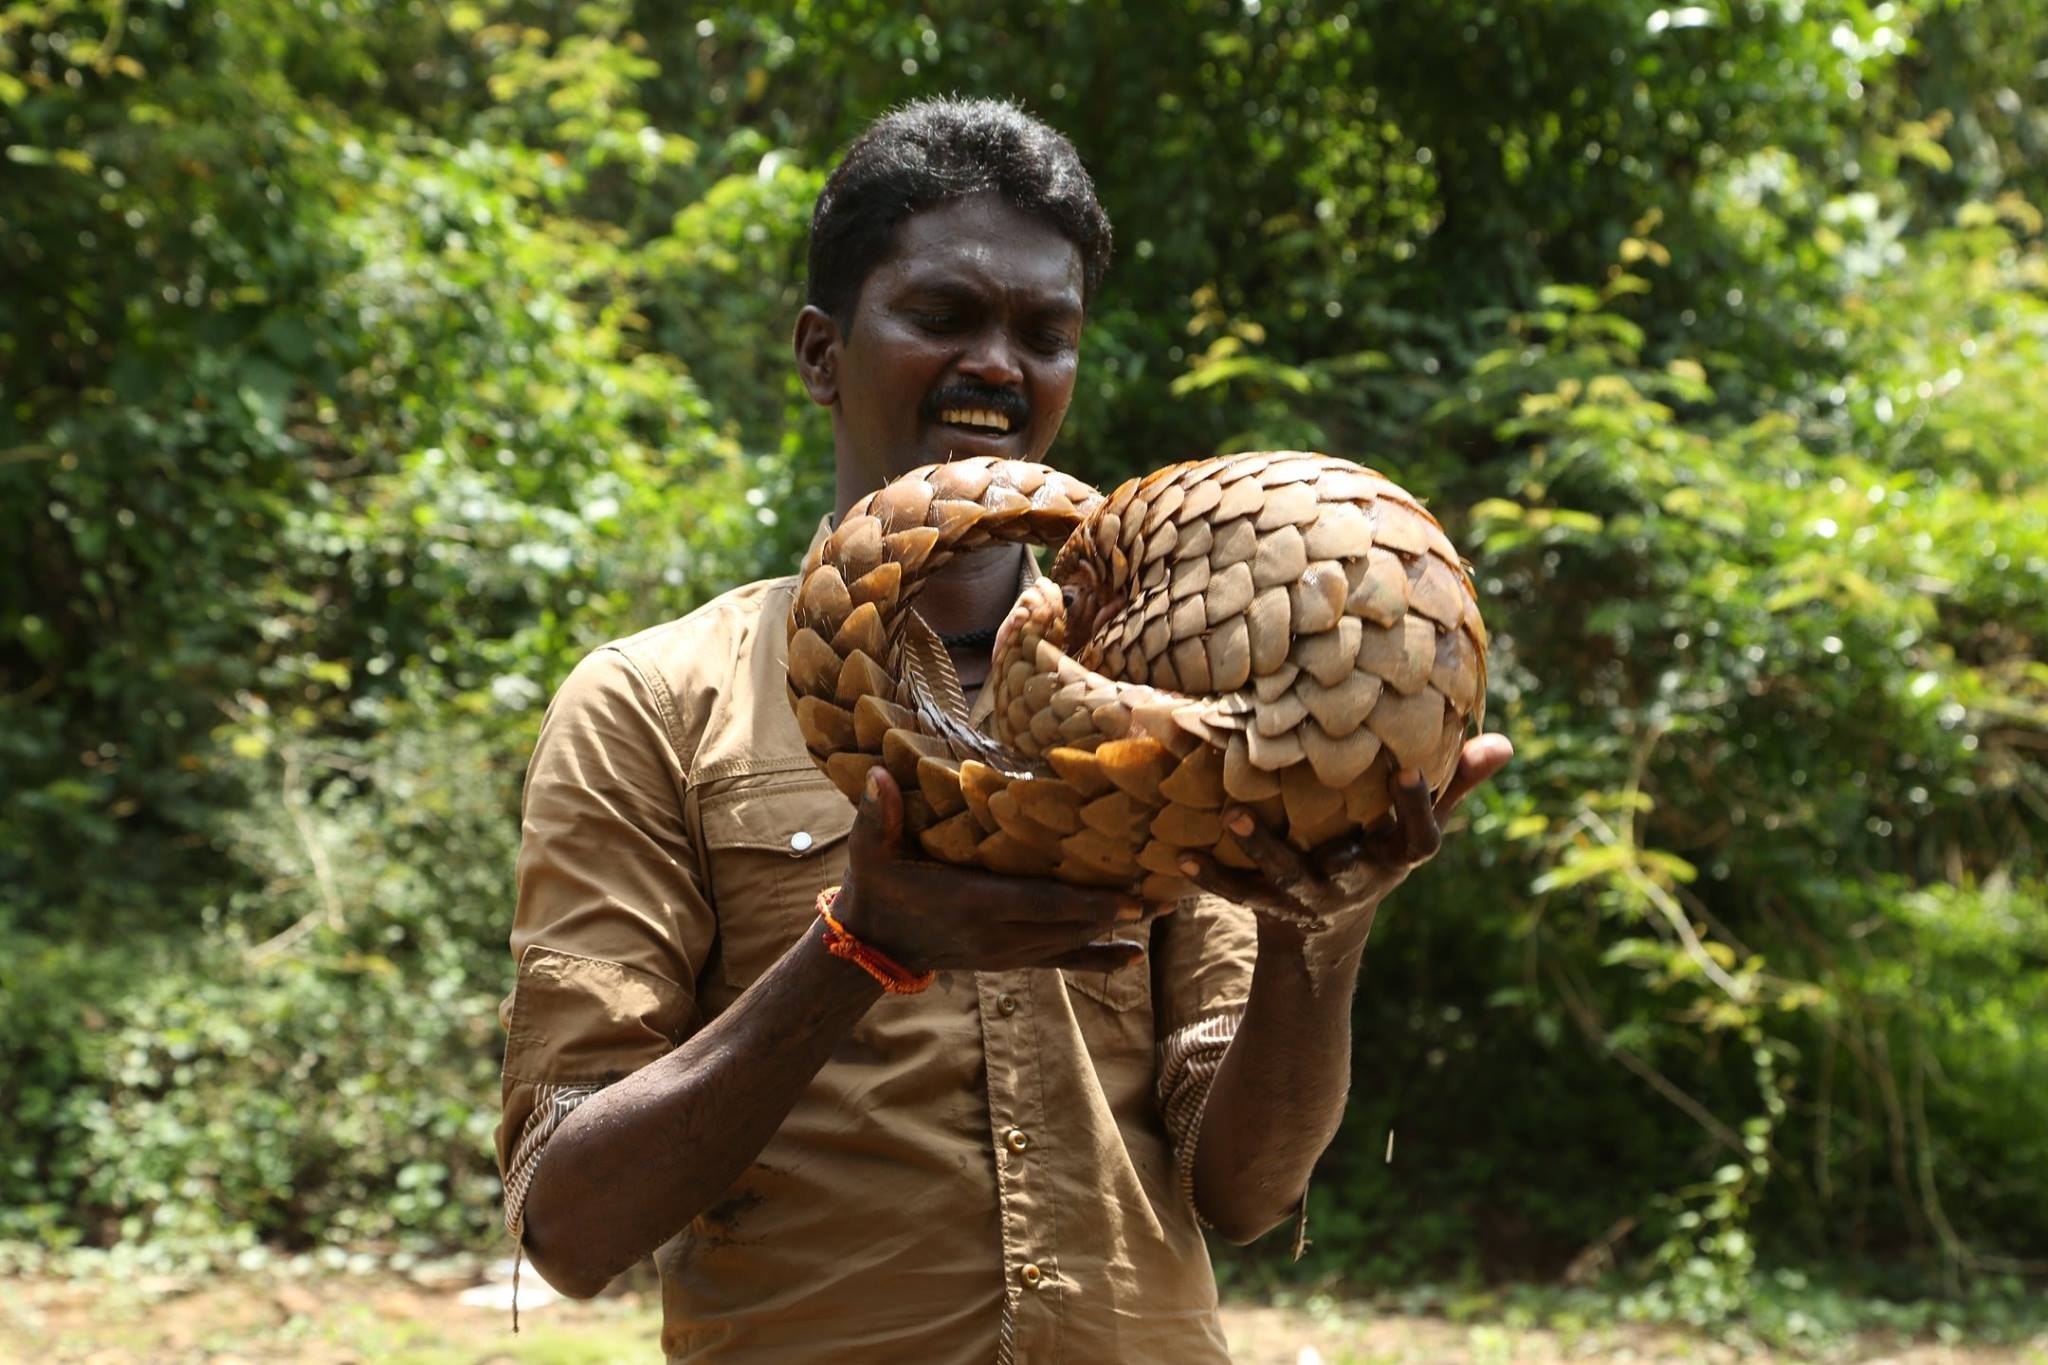 Snake catcher Va Va Suresh has recovered from a coma